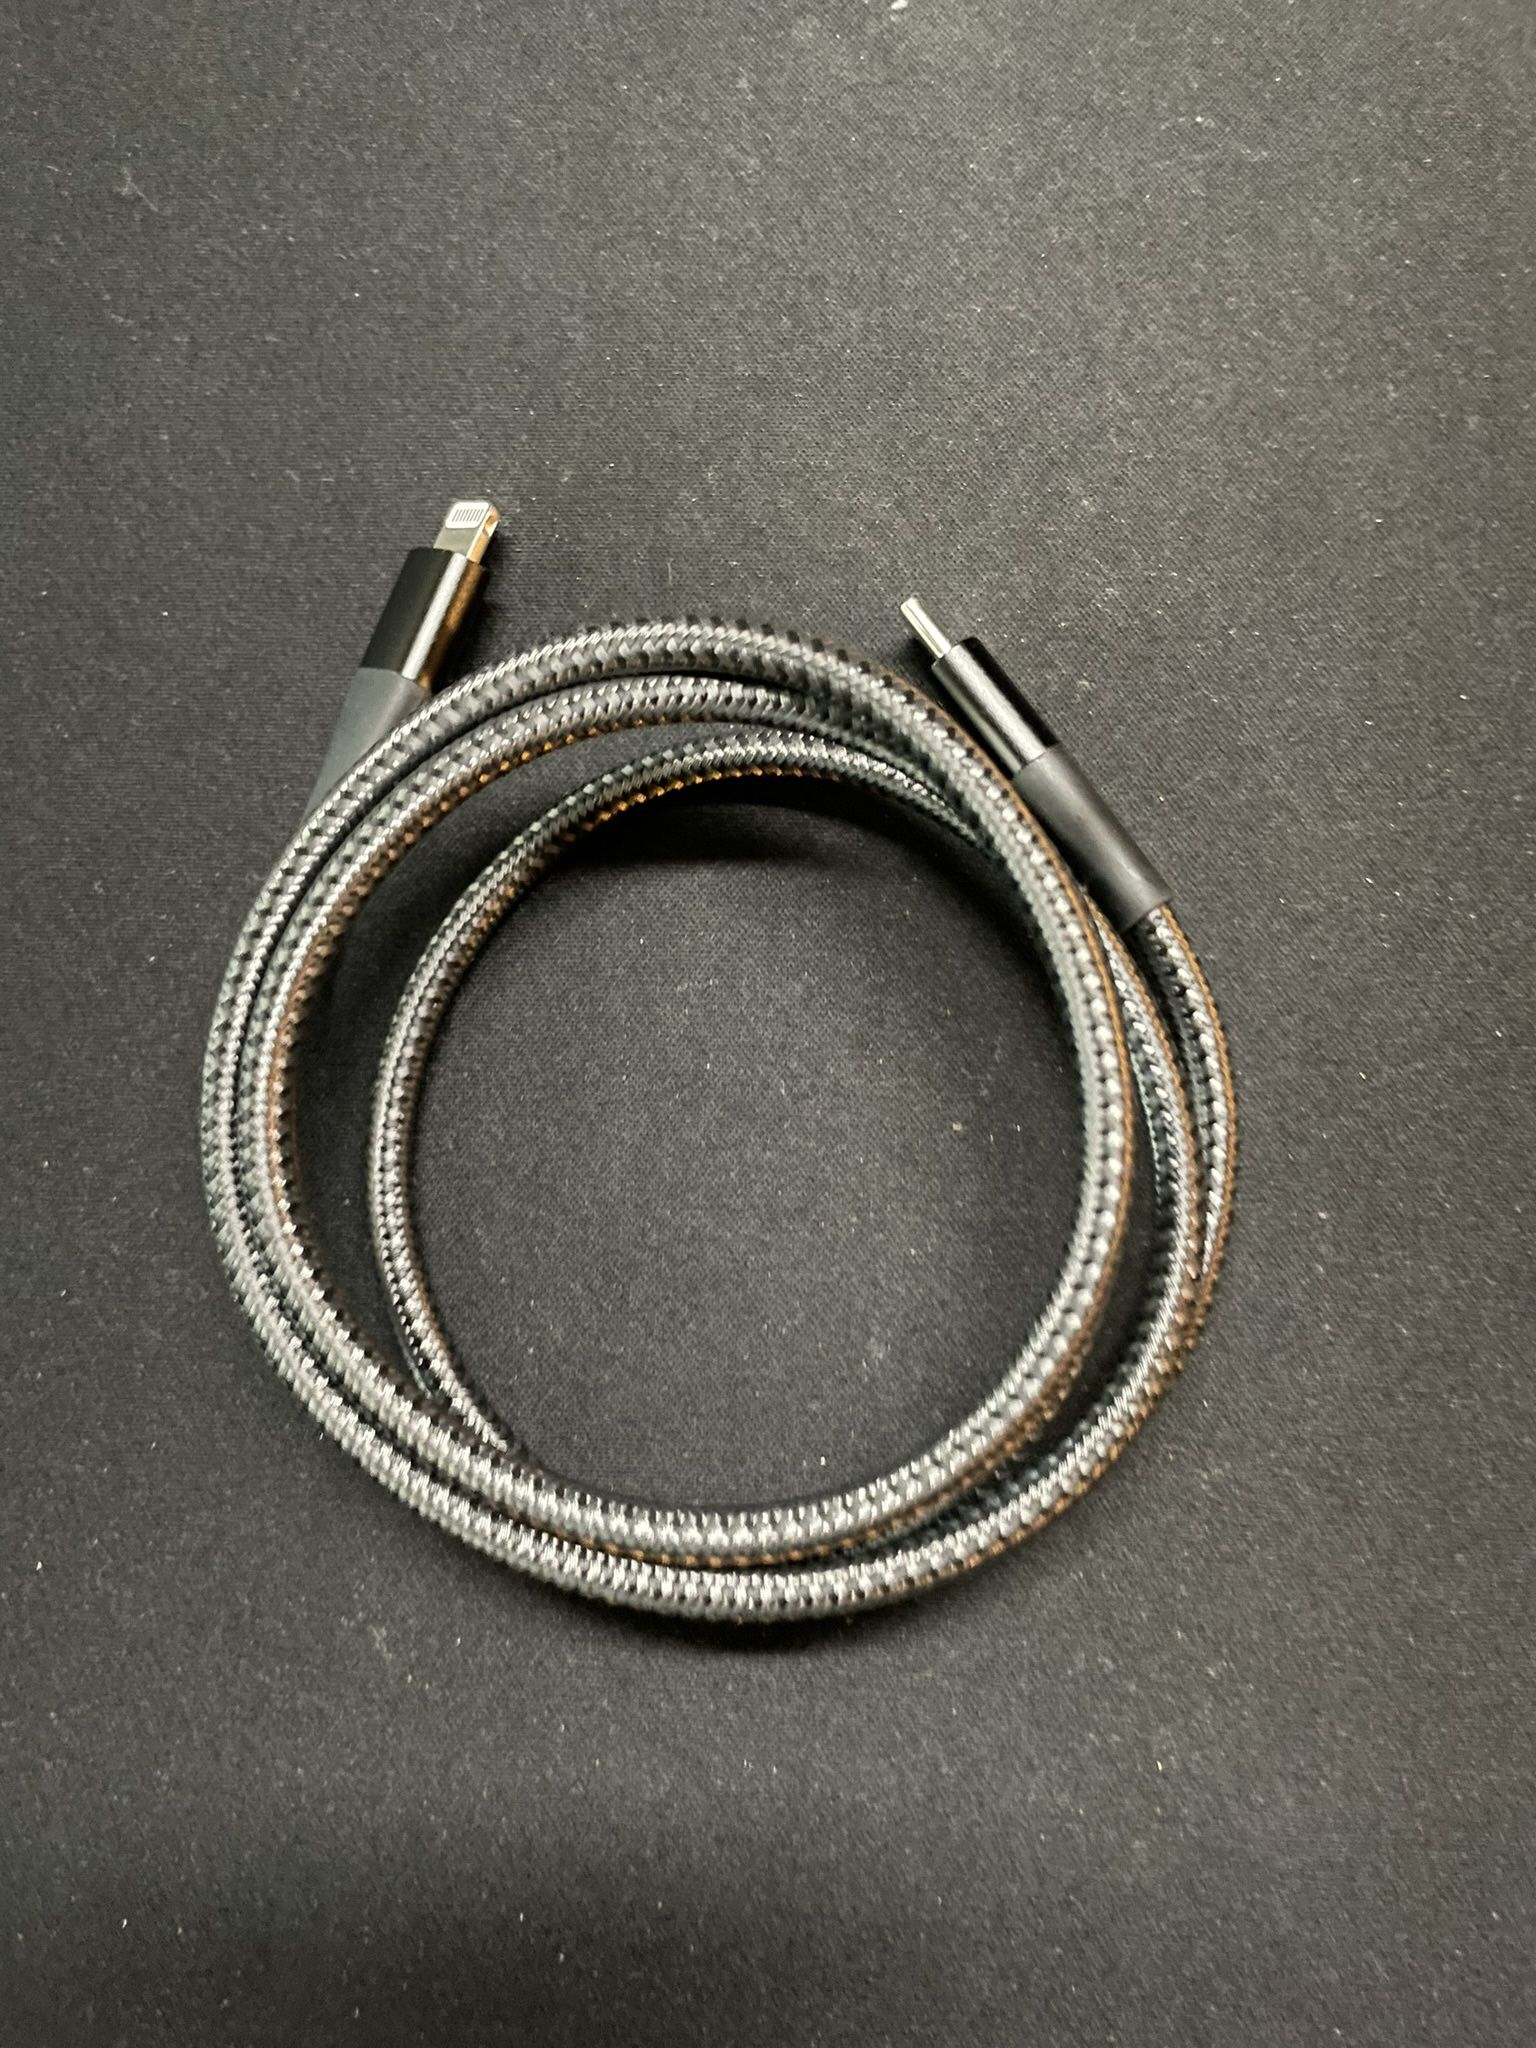 Anker Braided USB-C to Lightning Cable